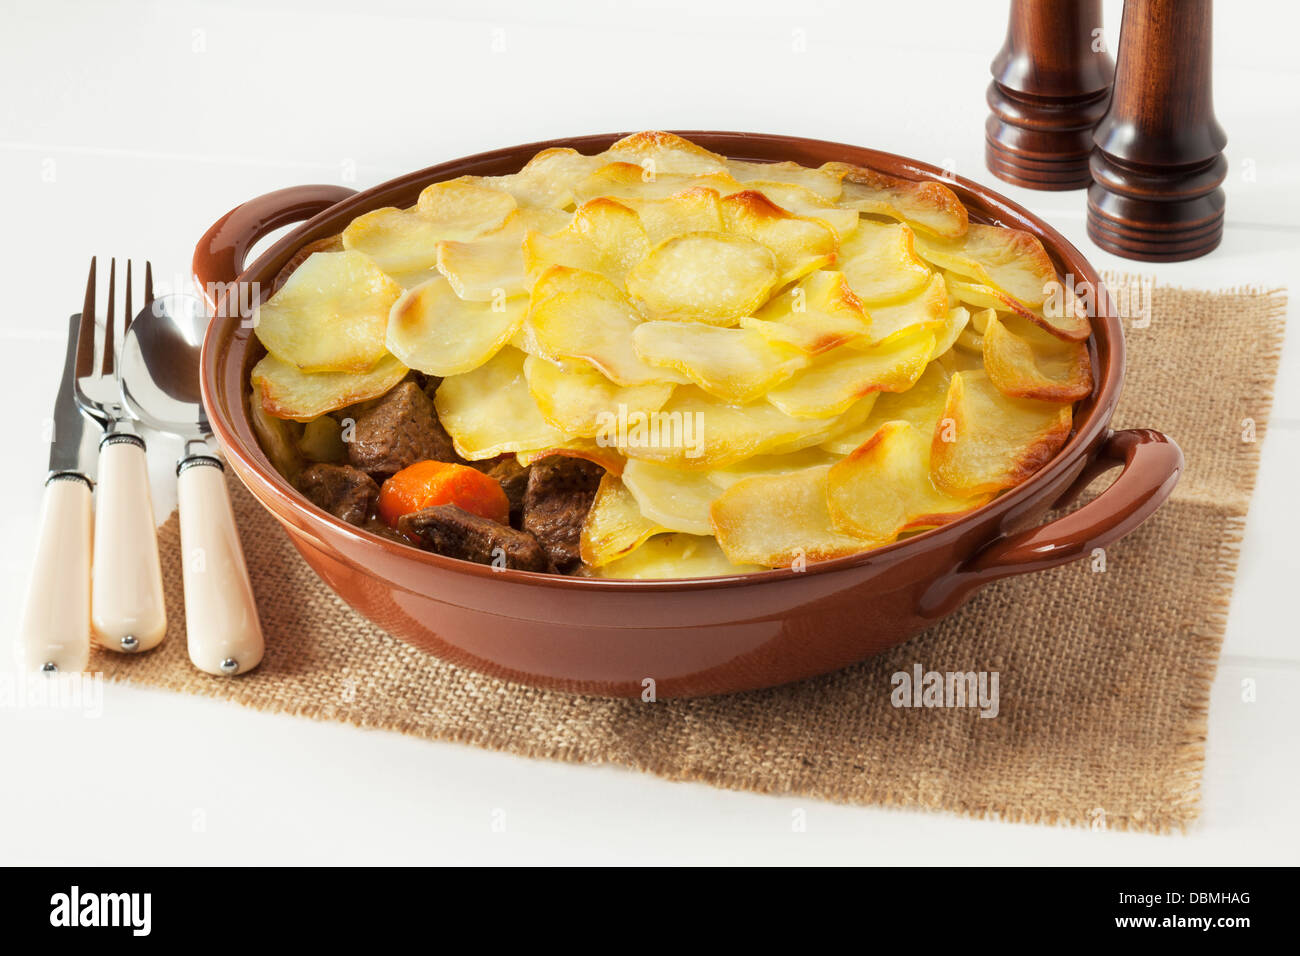 Lancashire Hotpot - regional speciality Lancashire Hot Pot, lamb and vegetables topped with sliced potatoes and oven baked... Stock Photo